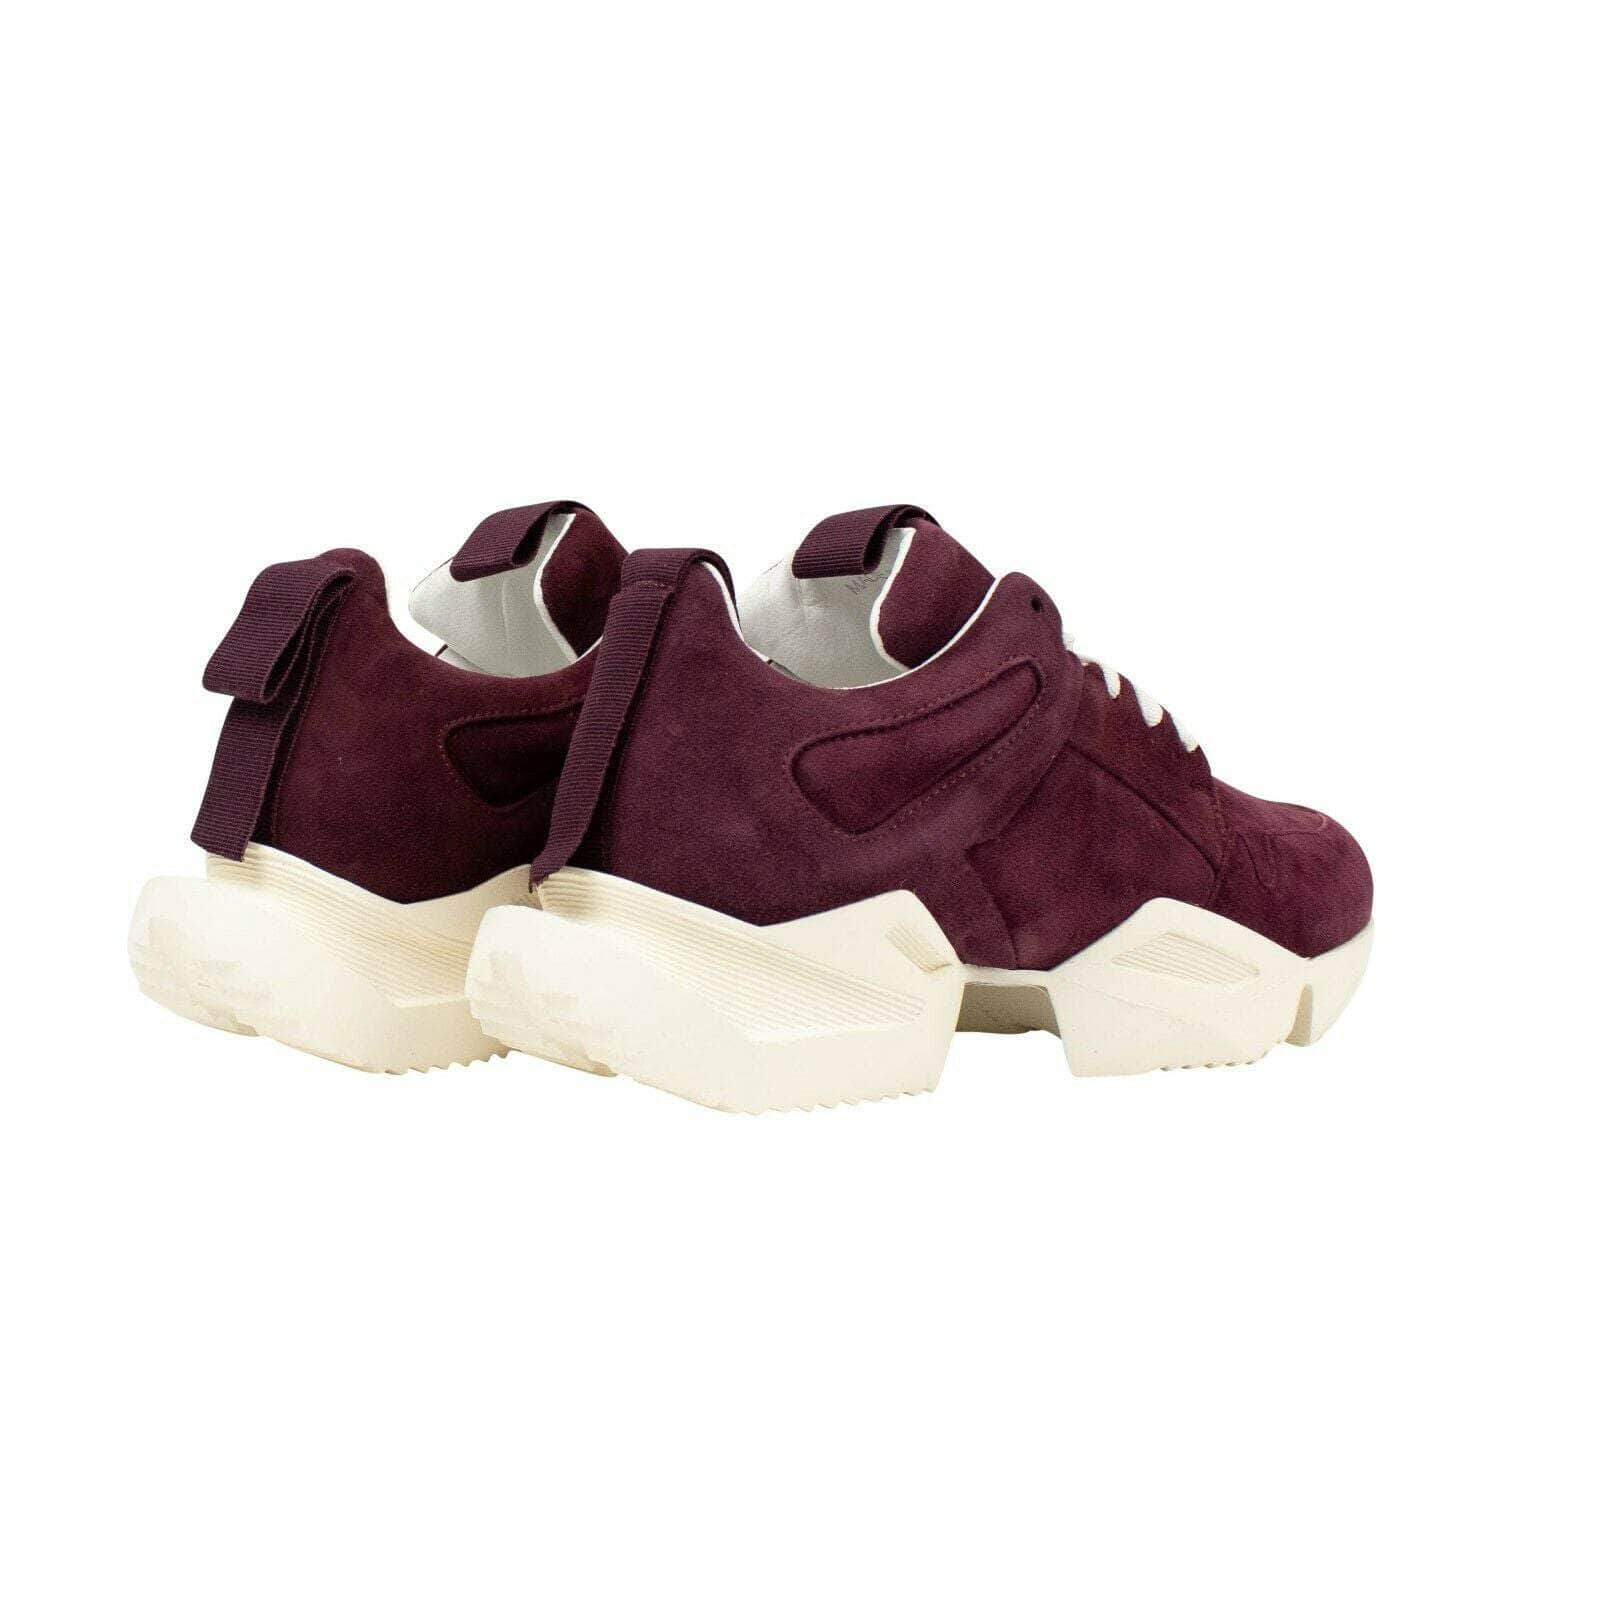 Unravel Project channelenable-all, chicmi, couponcollection, gender-womens, main-shoes, size-37, size-40, under-250, unravel-project Purple Suede Cut Out Sneakers